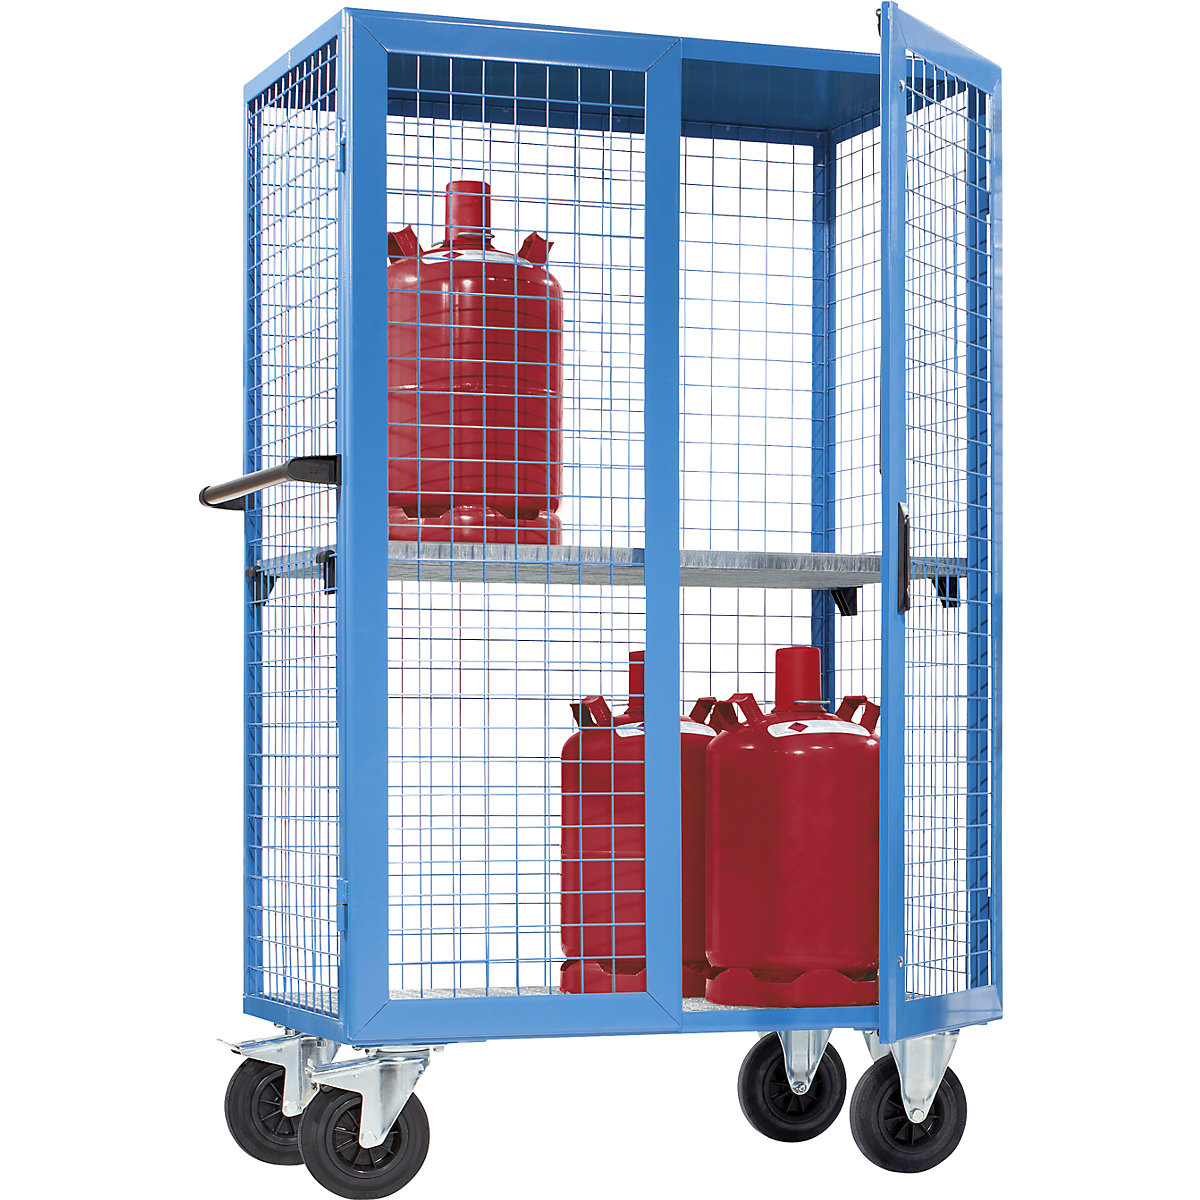 Gas cylinder mesh container - eurokraft pro